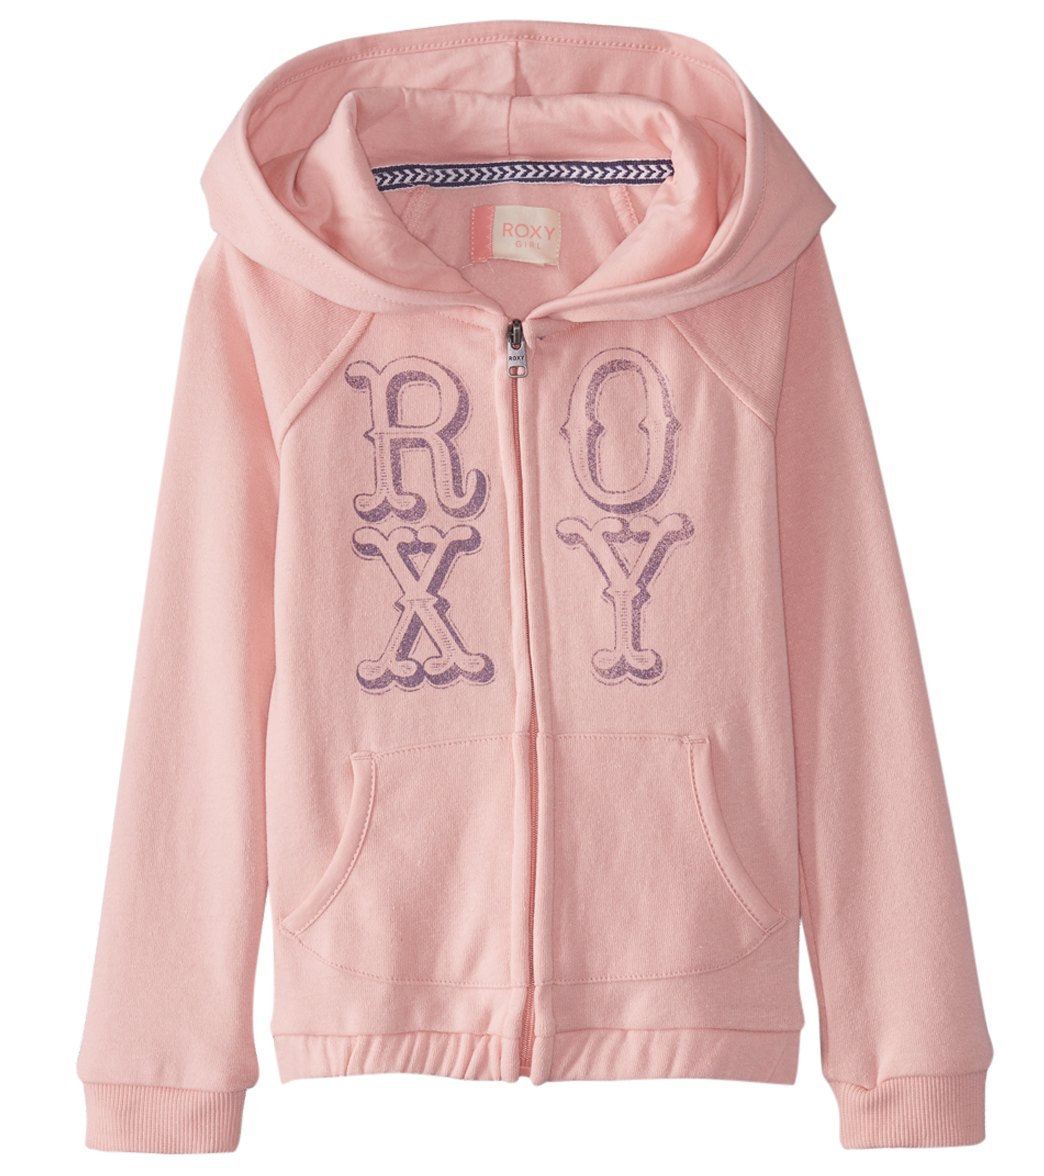 Roxy Girls' Holding On Zipped Hoodie - Mellow Rose 5 Cotton/Polyester - Swimoutlet.com